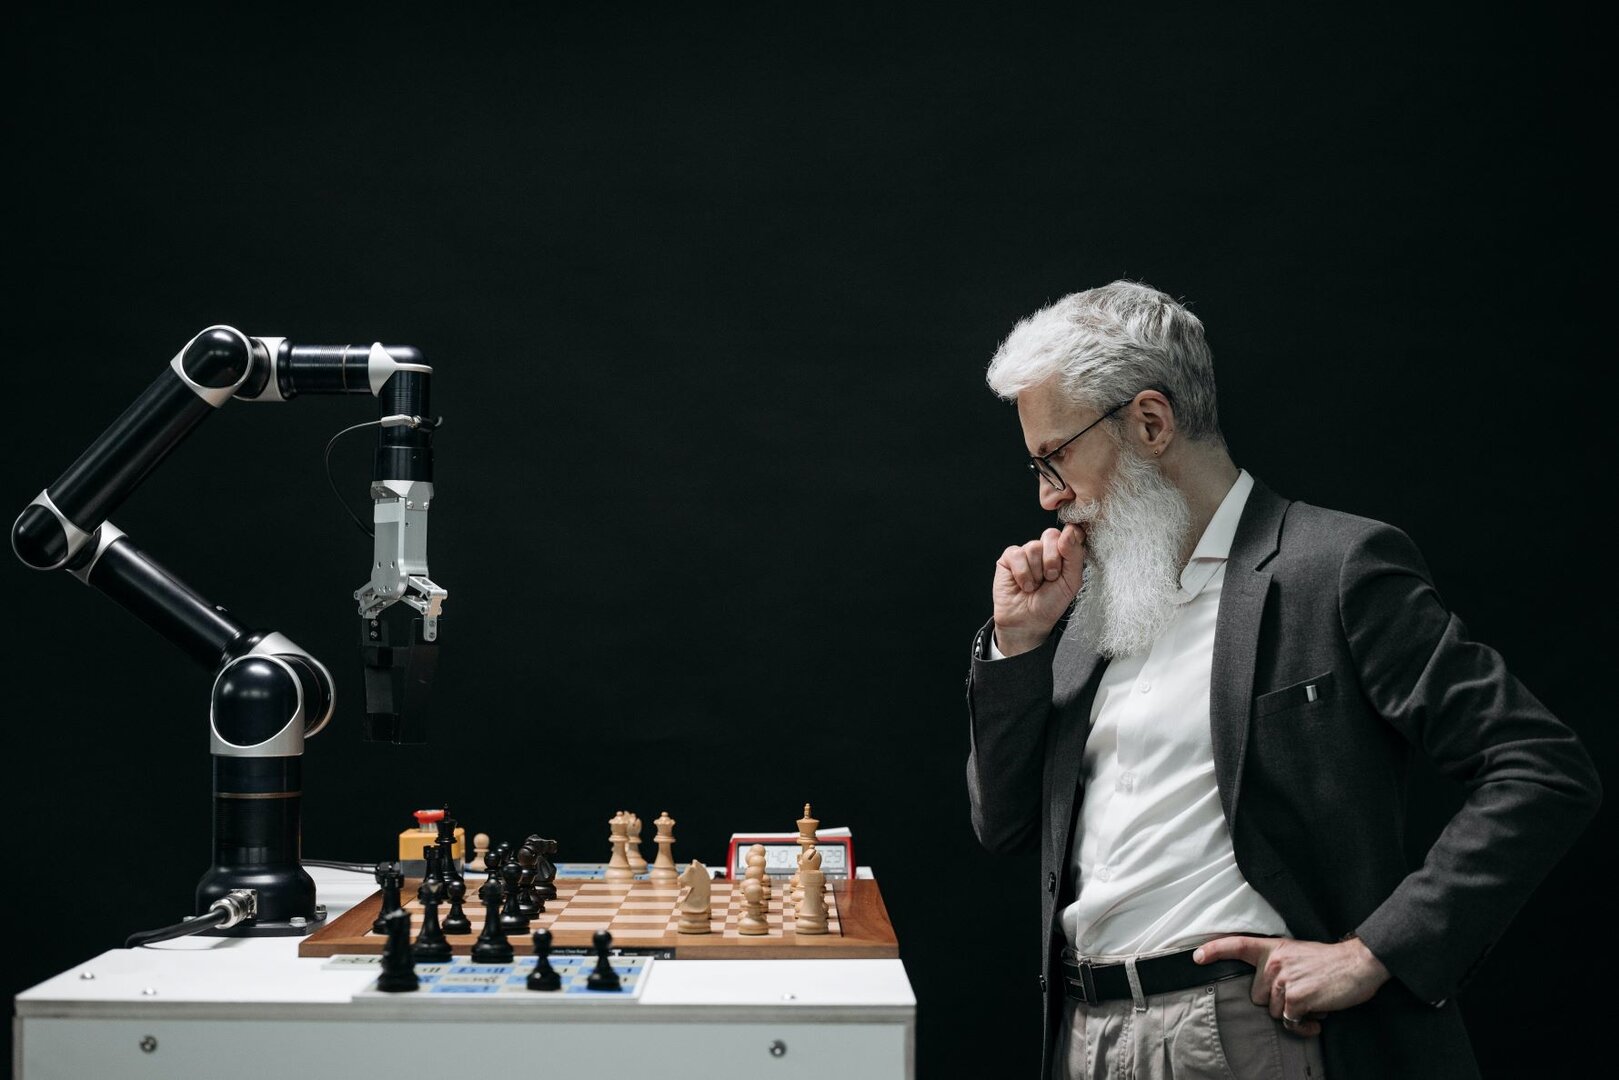 Chess man against robot, ChatGPT in recruiting advantages and disadvantages